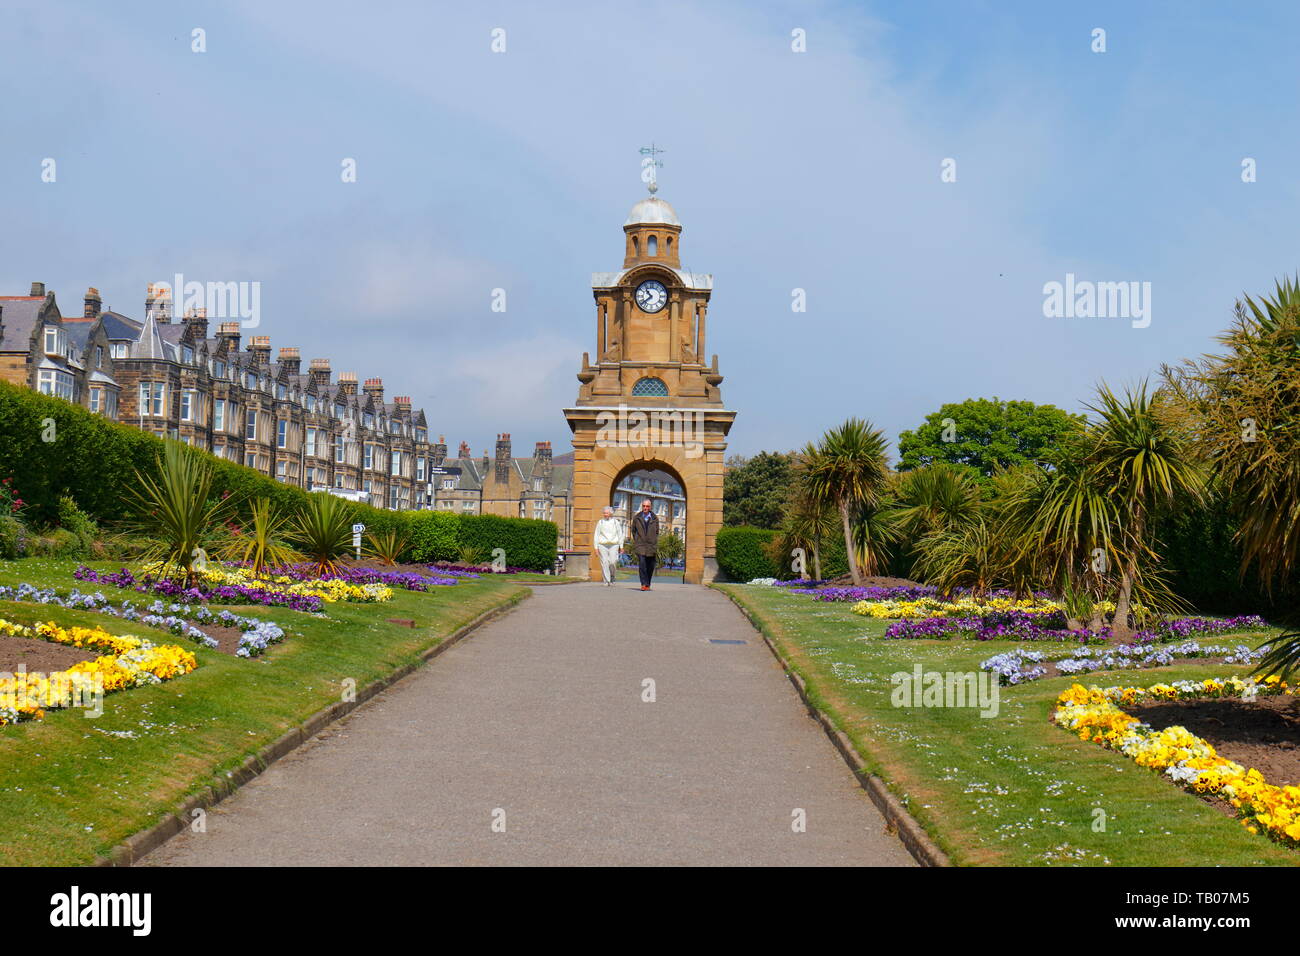 A clock tower on Esplanade Gardens in Scarborough,North Yorkshire Stock Photo